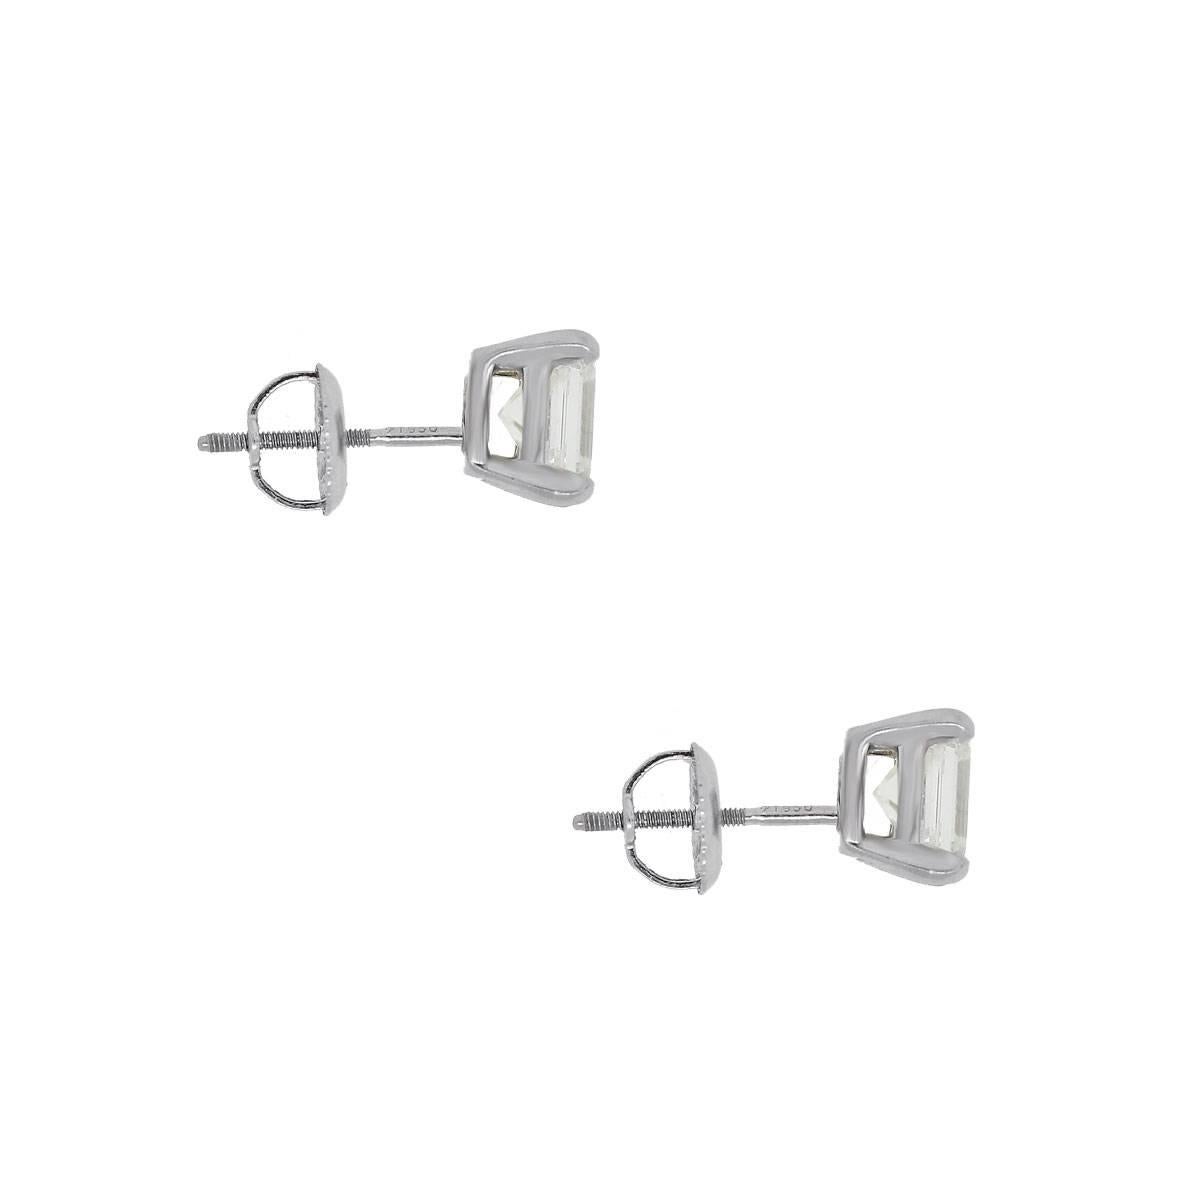 Style: Tiffany & Co. Platinum 1.83ctw Emerald Cut Diamond Stud Earrings
Material: Platinum
Diamond Details: 2 Emerald Cut Diamonds approximately 1.83ctw total. Diamonds are F in color and VVS2/VS1 in clarity.
Earring Measurements: 0.64